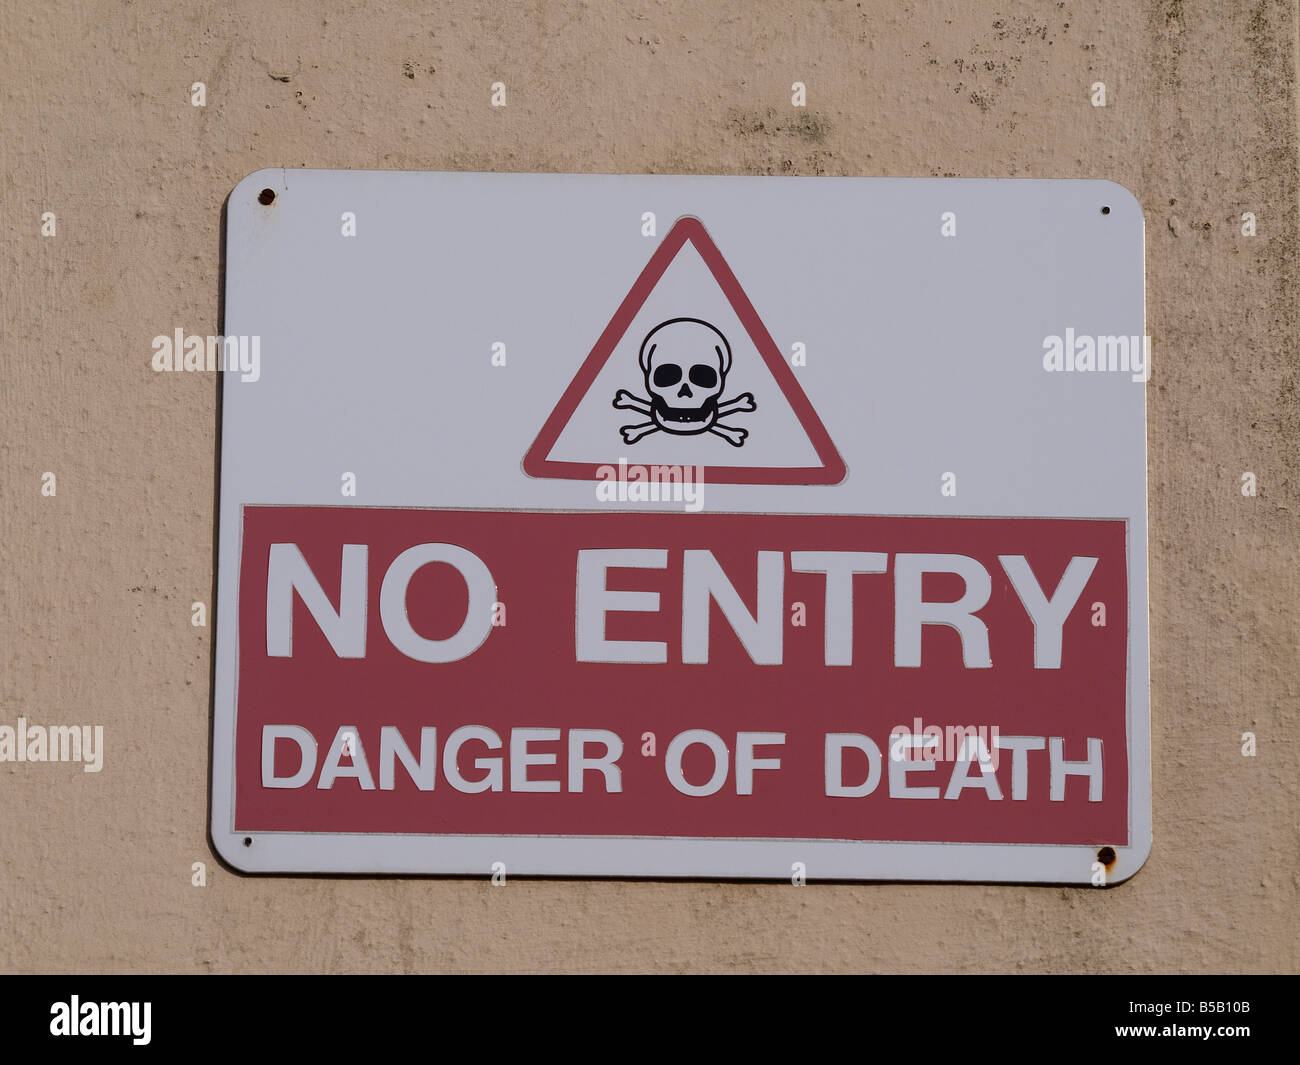 No entry danger of death, sign Stock Photo